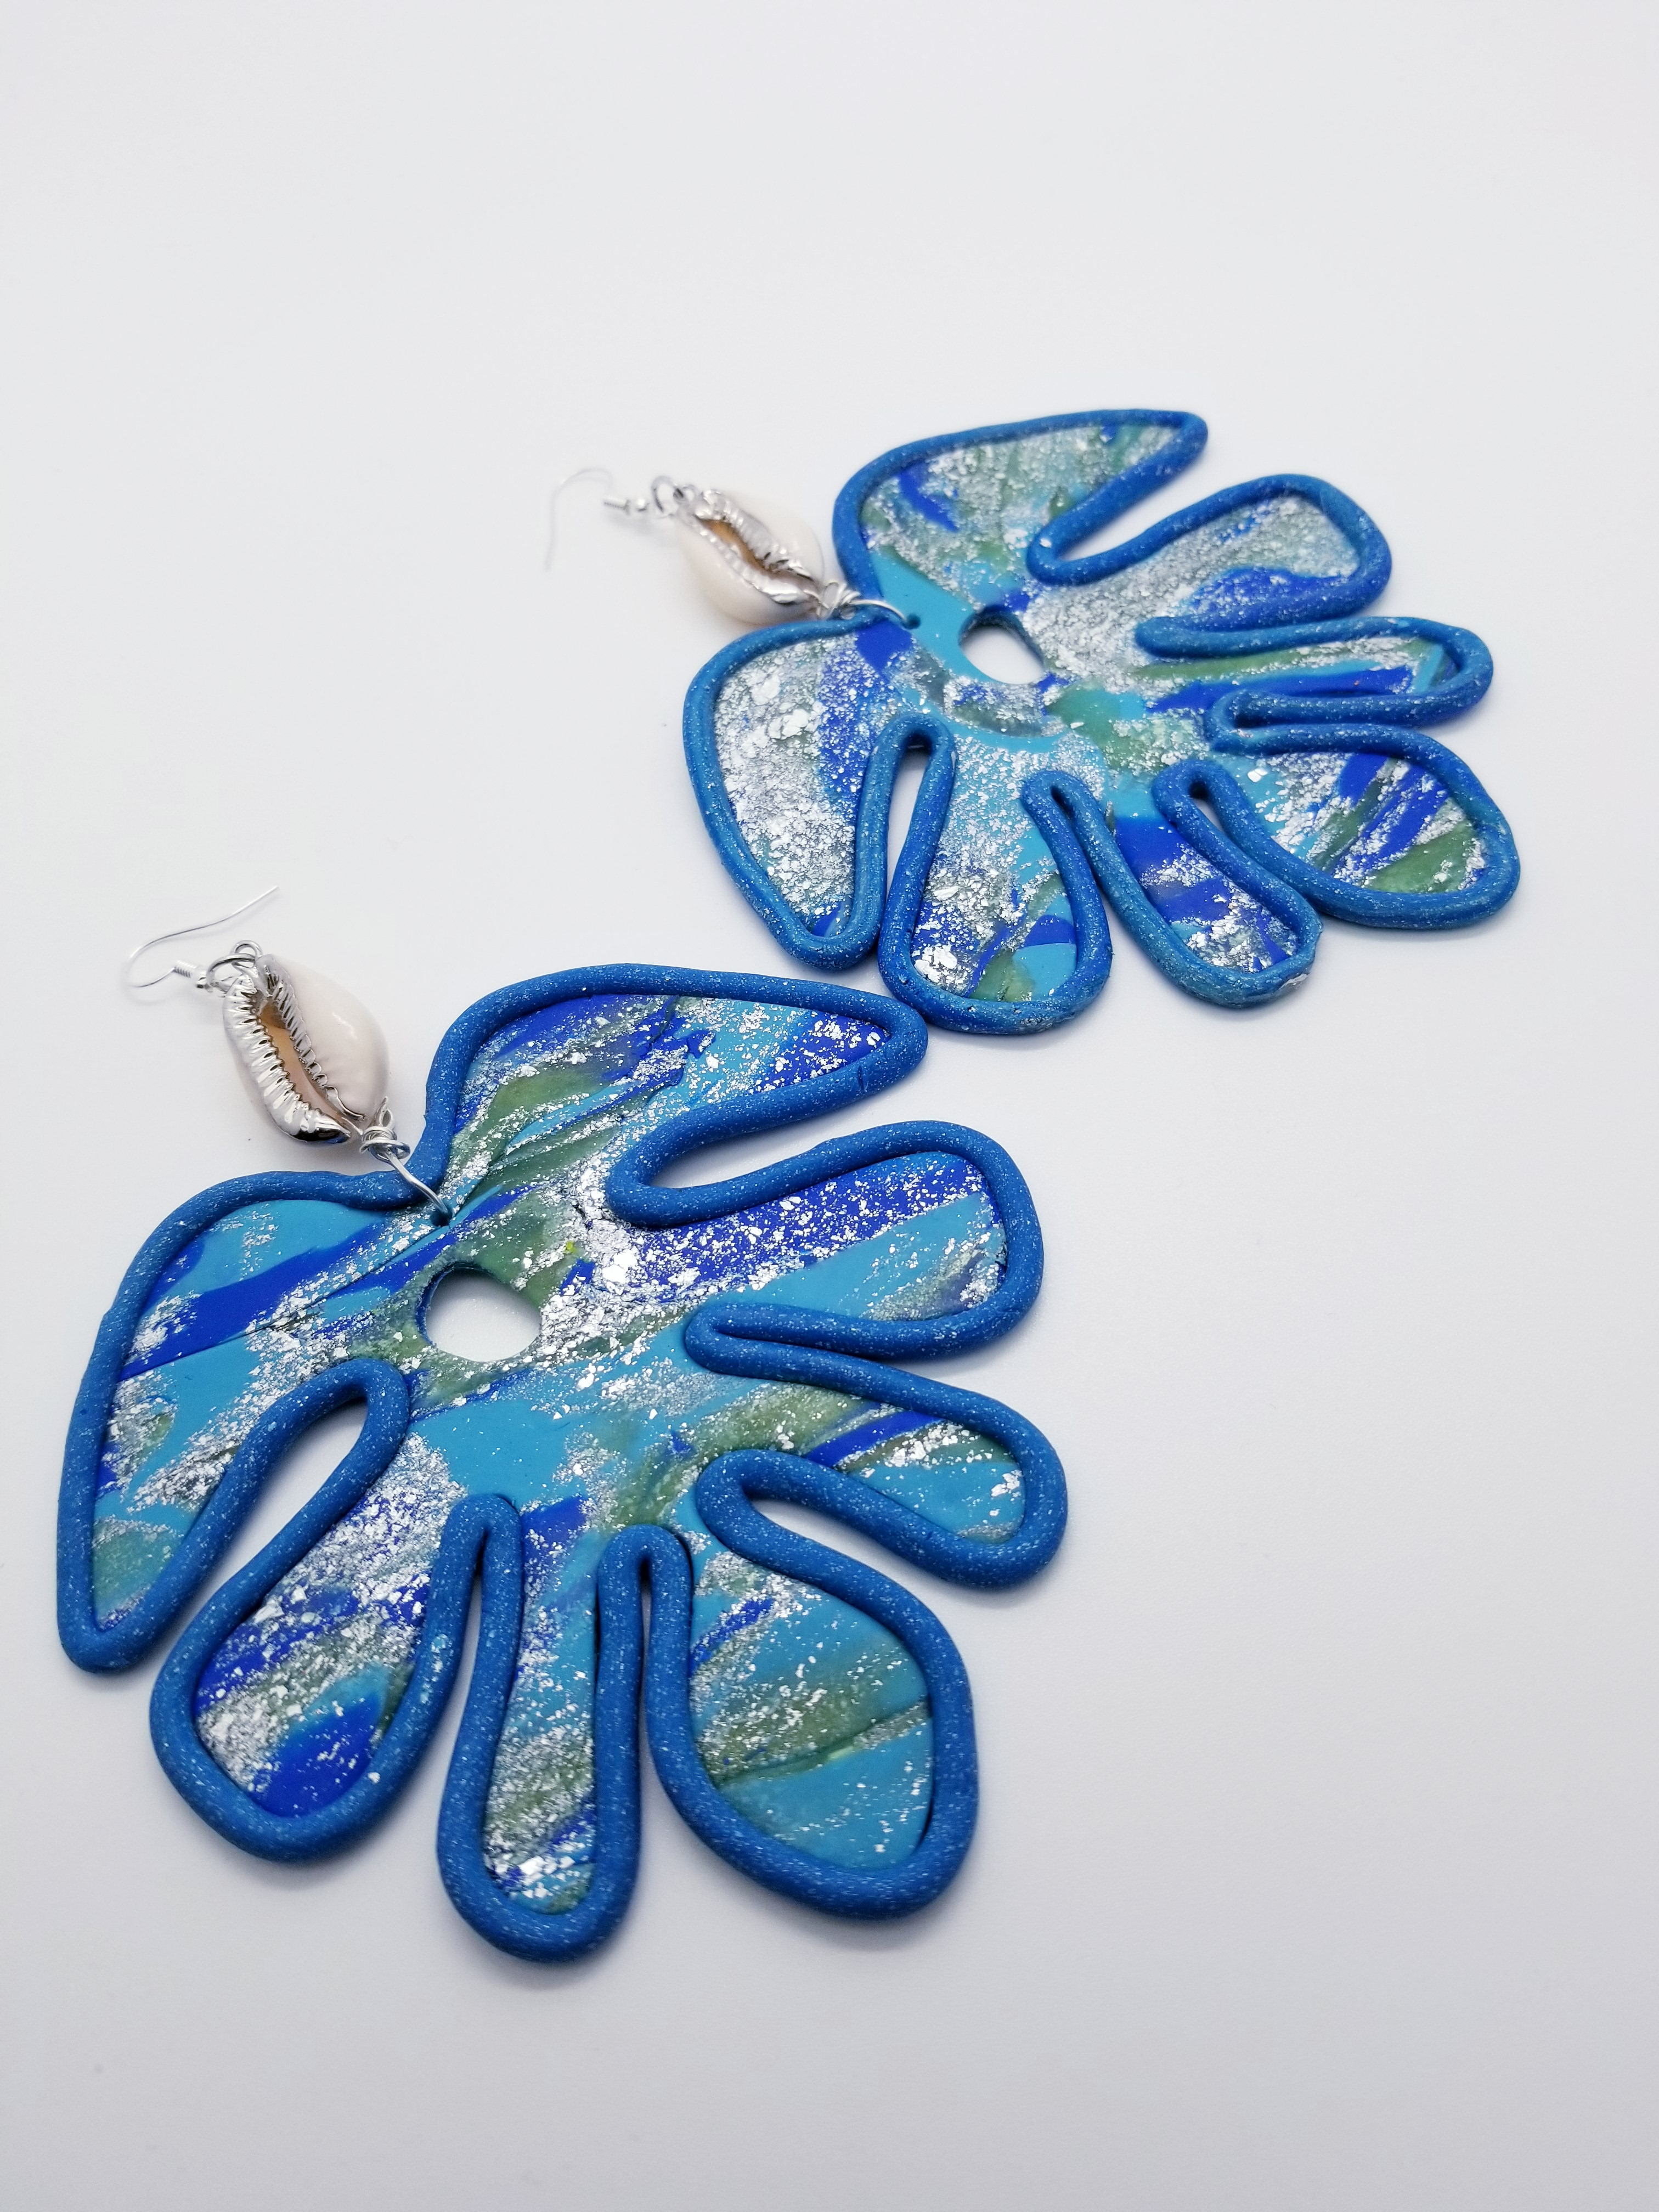 Length: 5 inches | Width: 3.5 inches | Weight: 1.5 ounces The Monstera plant represents Honor, Respect, and Longevity! These earrings are handmade using blue marble polymer clay, silver flakes, and ceramic cowrie shell on silver alloy hypoallergenic hook with rubber back closures.